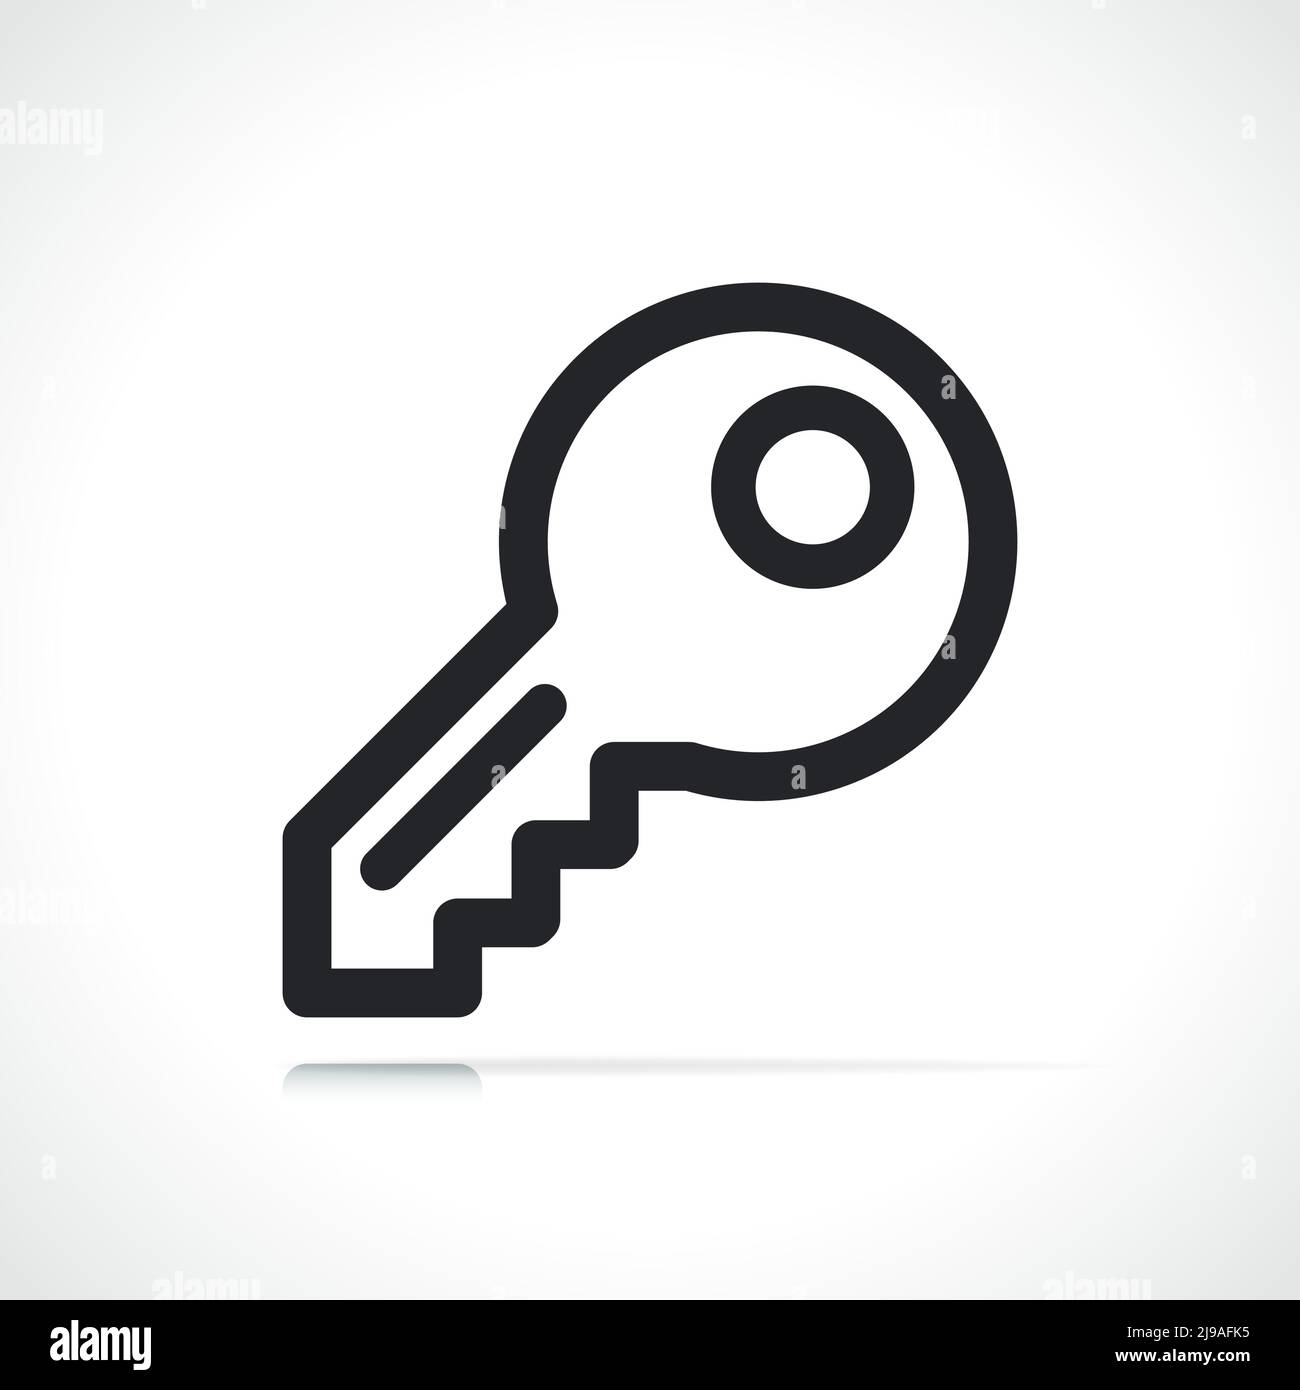 key or password line icon isolated illustration Stock Vector